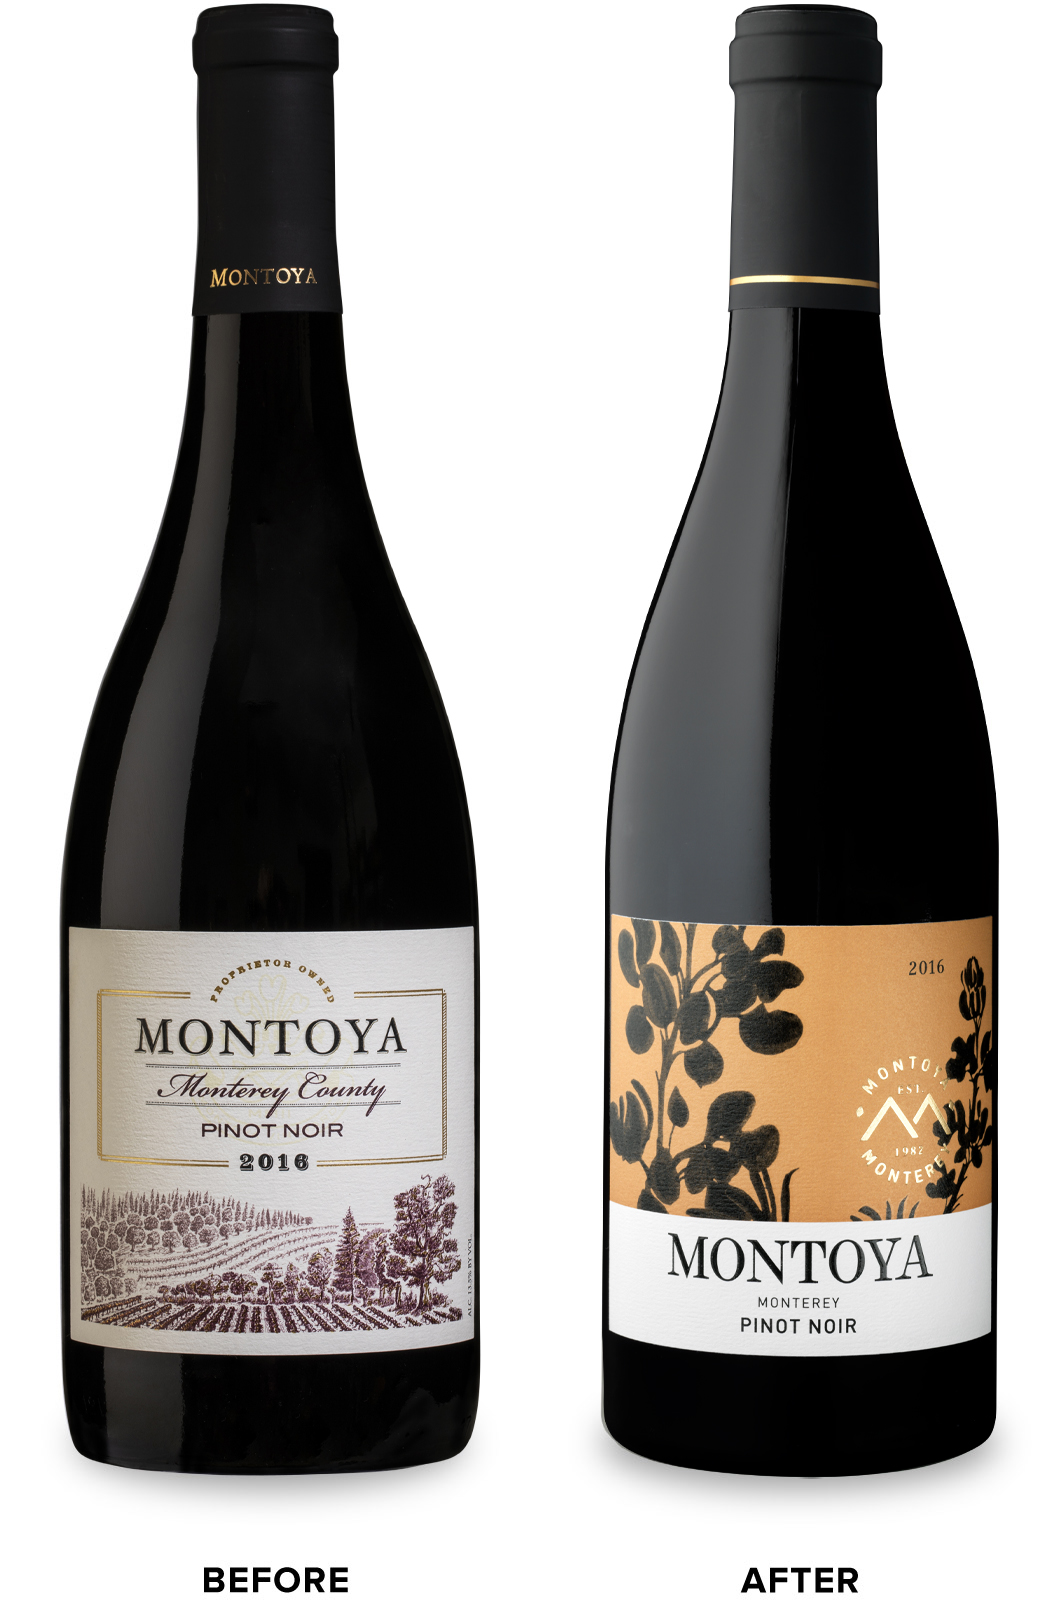 Montoya Pinot Noir Wine Packaging Before Redesign on Left & After on Right